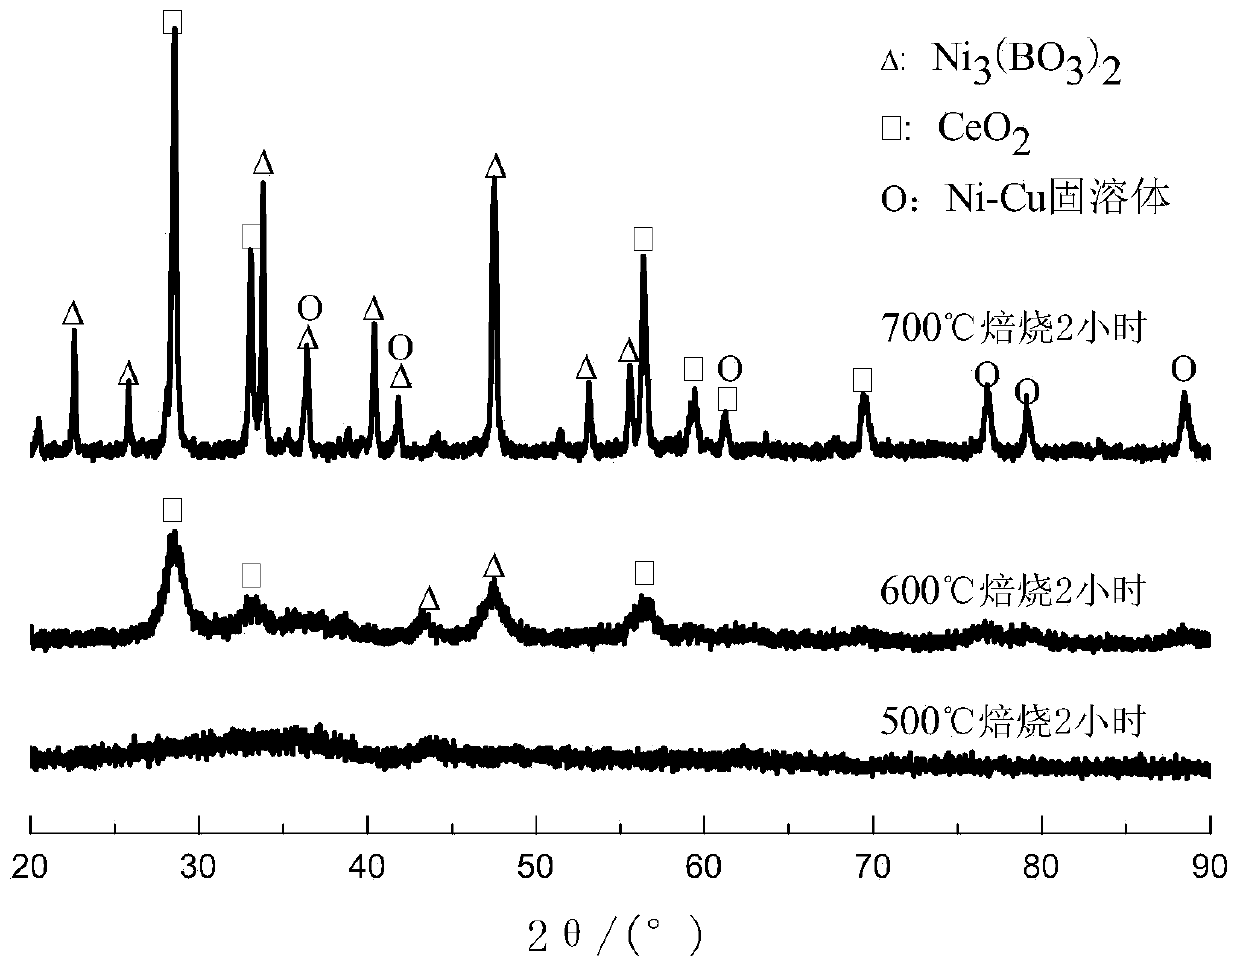 Amorphous Catalyst for One-step Hydrogenation of Aqueous Phenol to Cyclohexanone